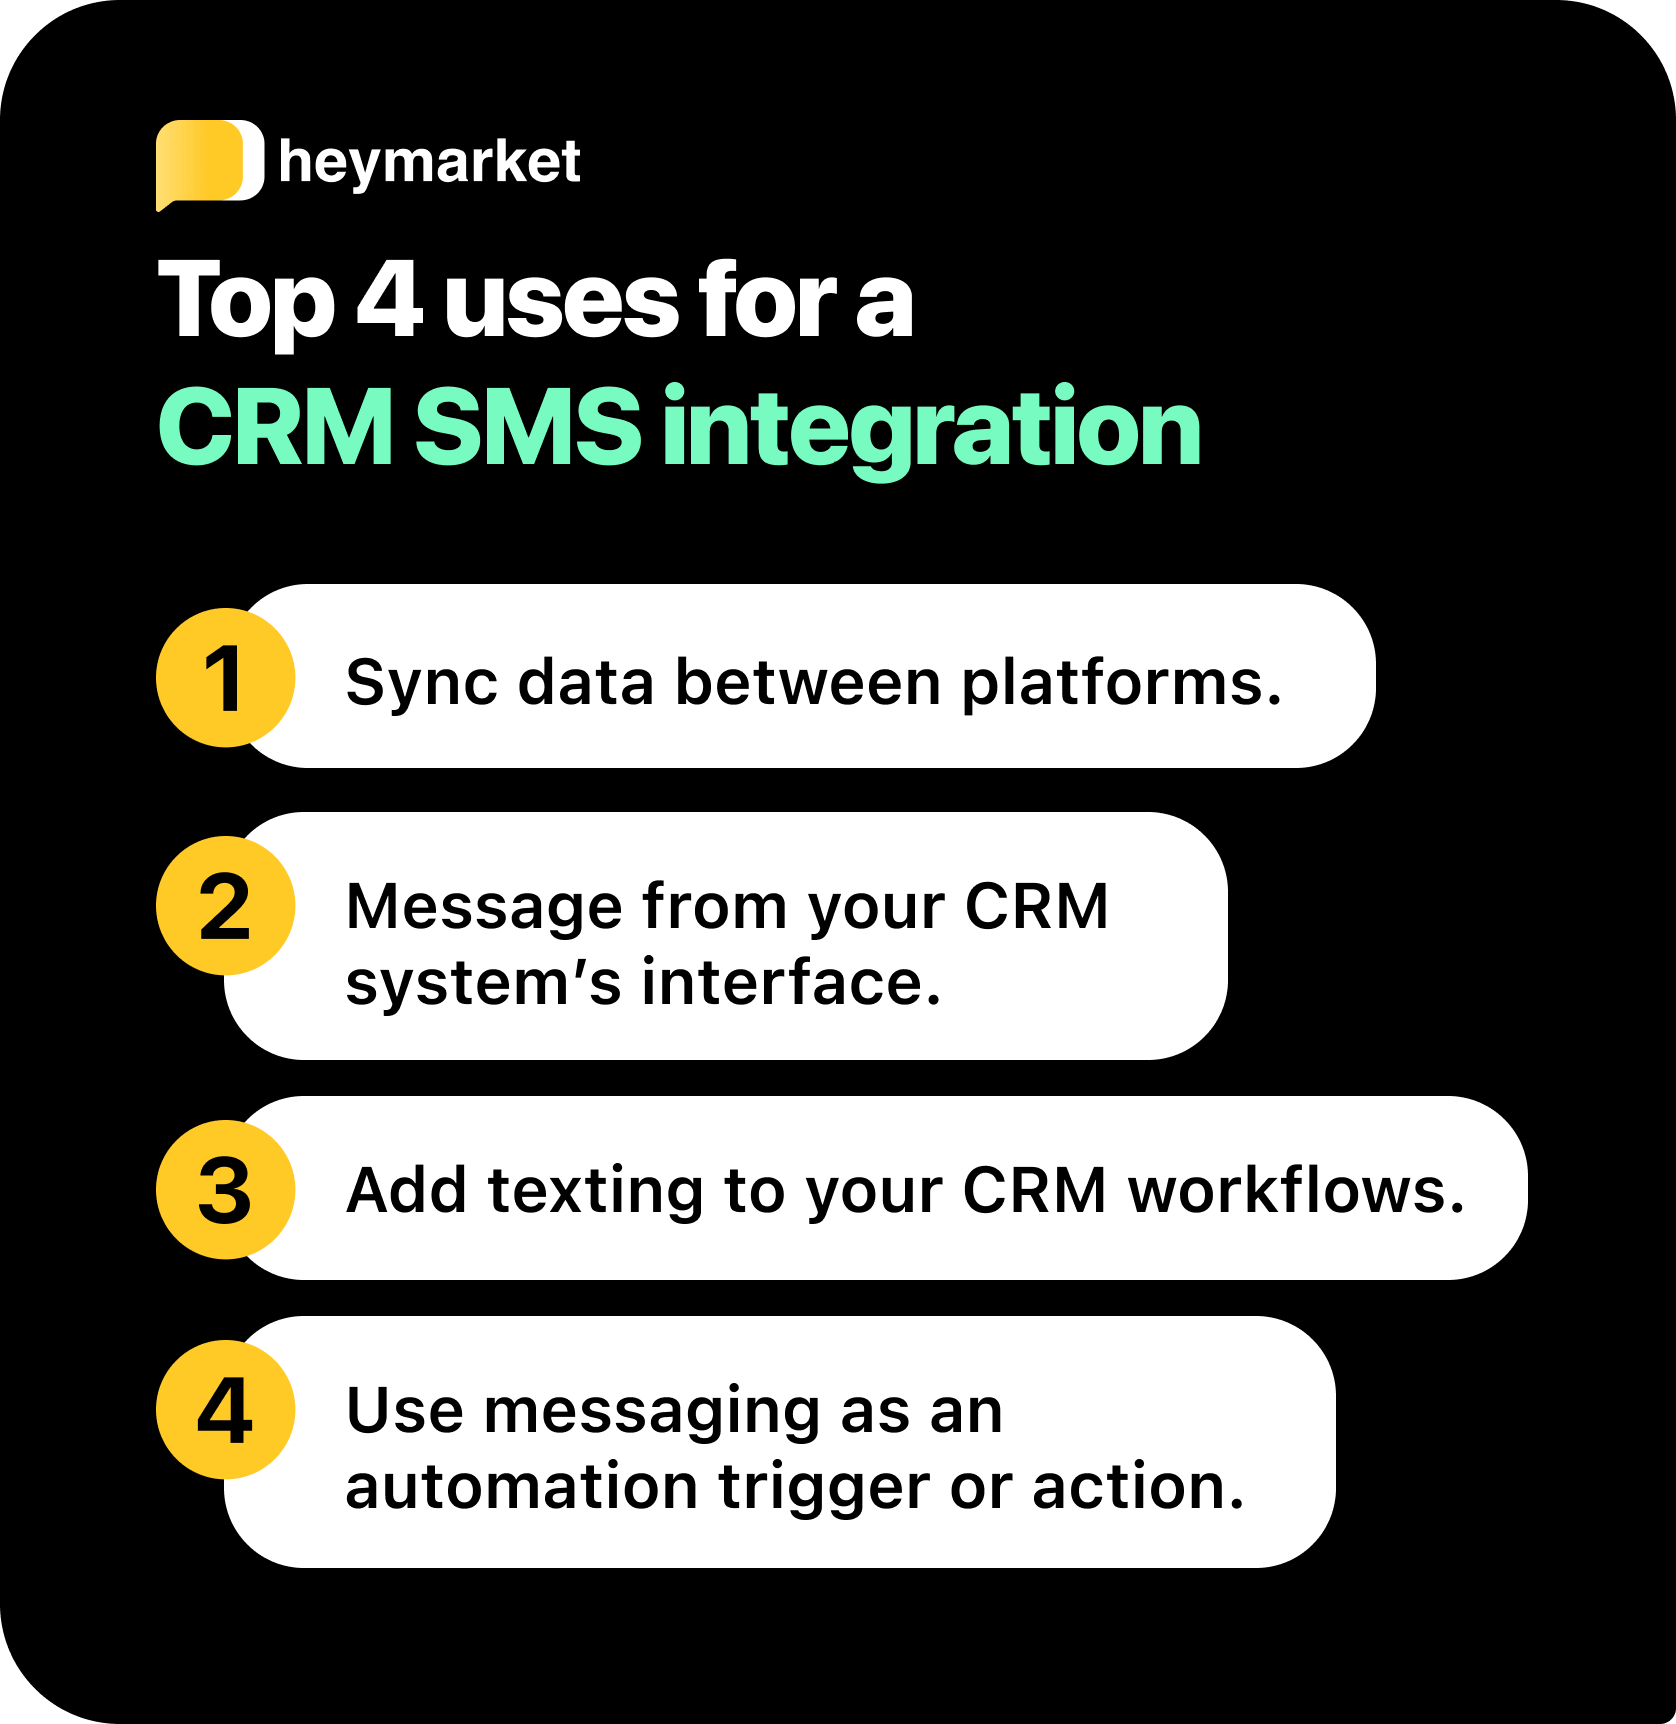 How uses for a CRM SMS integration